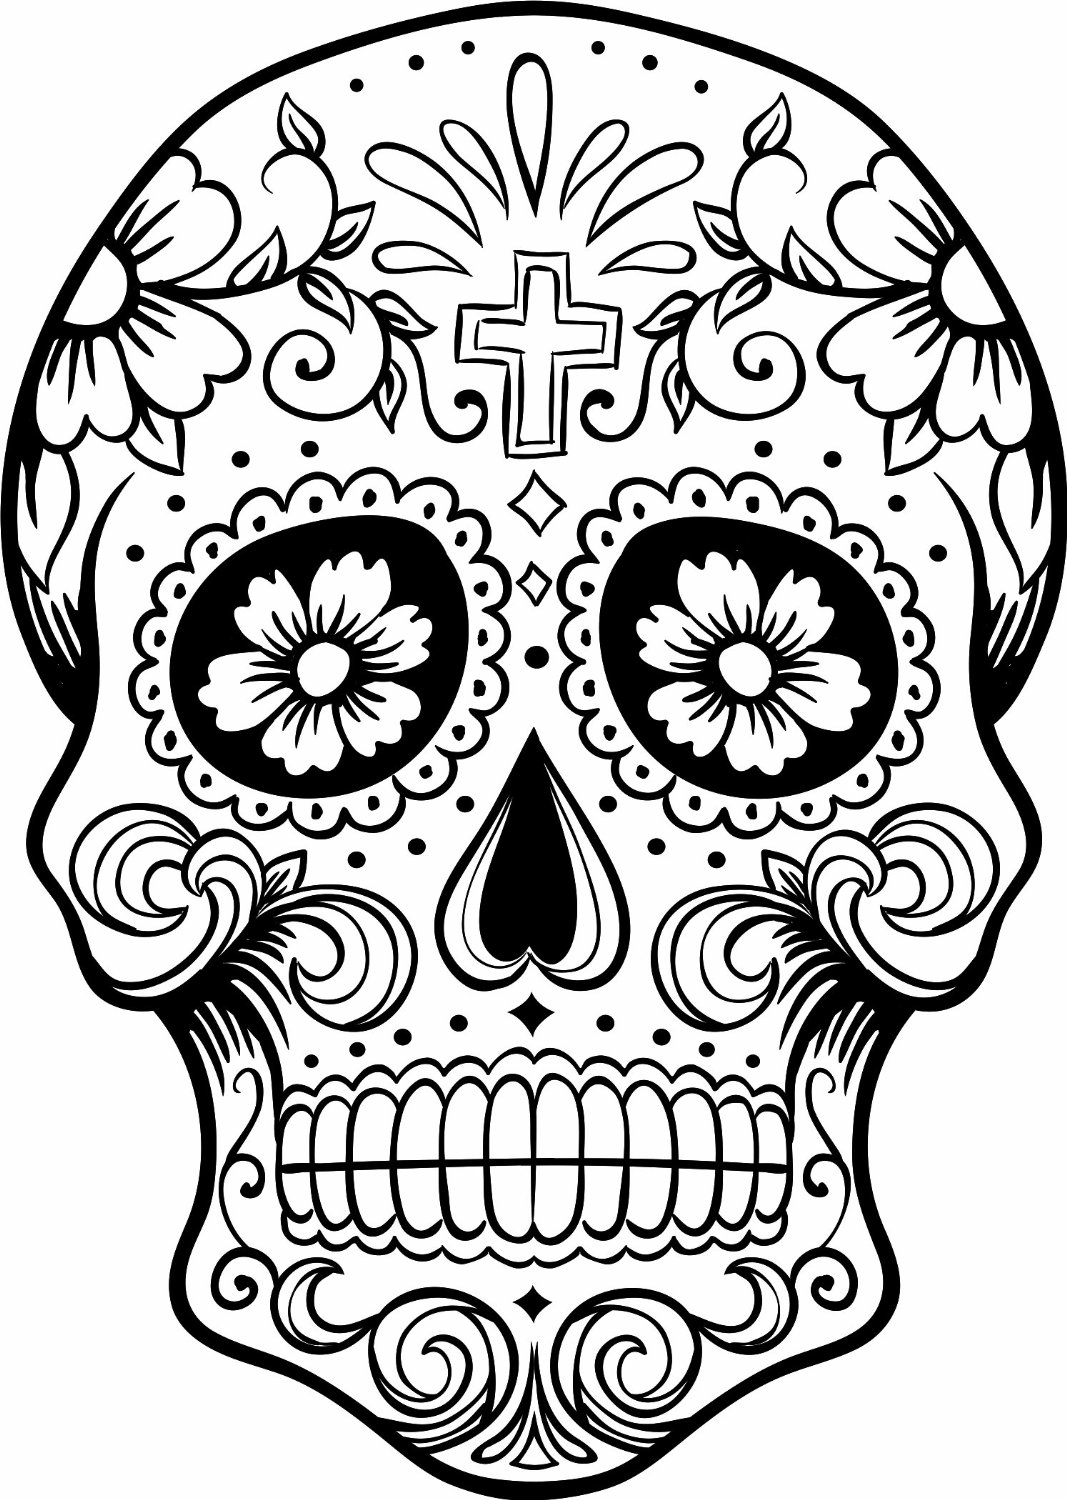 day of the dead pictures to color day of the dead woman artist juline coloring pages color of the to day dead pictures 